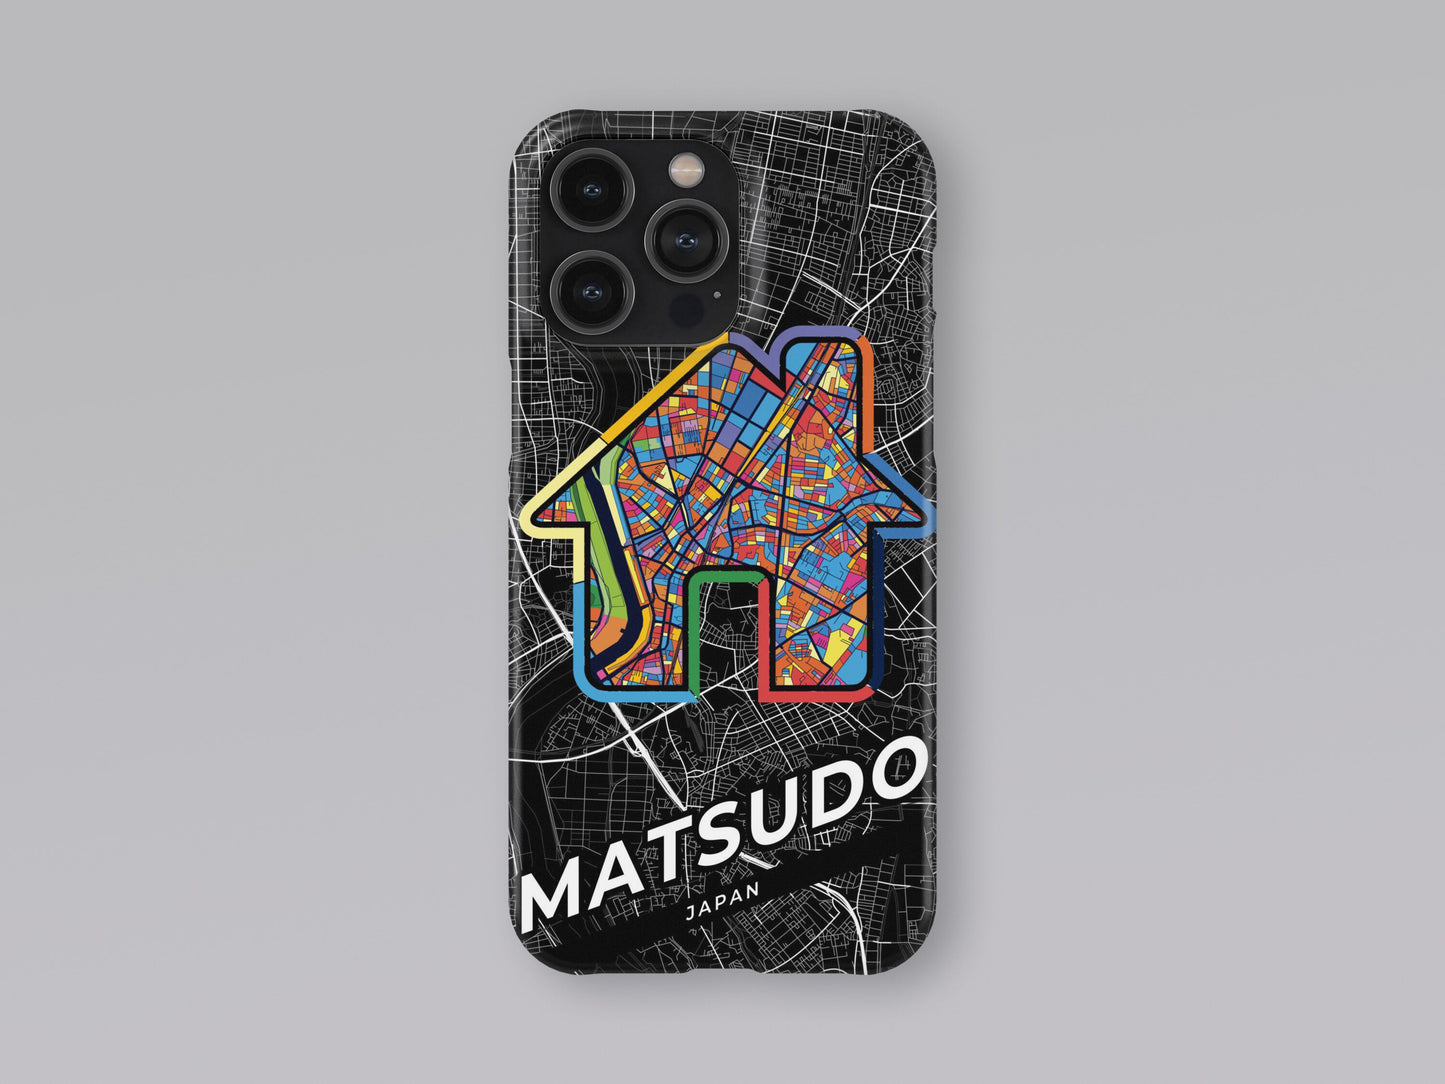 Matsudo Japan slim phone case with colorful icon. Birthday, wedding or housewarming gift. Couple match cases. 3